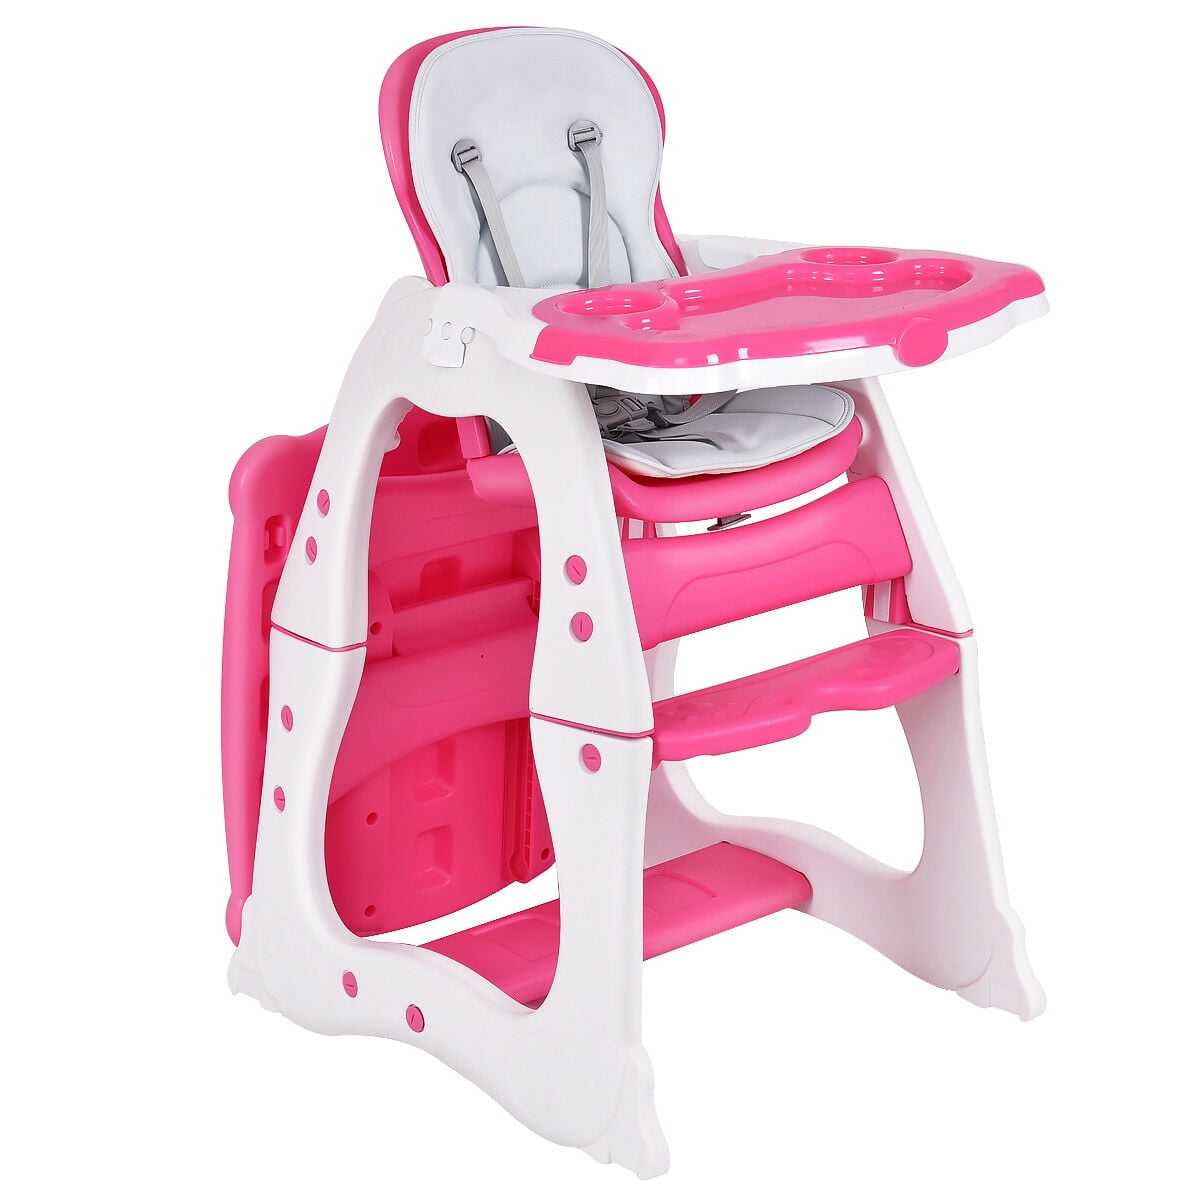 Safety Harness Storage Basket COSTWAY Convertible Baby Highchair Toddlers Rocking Chair Booster Seat with Double Removable Tray Height Adjustable Infants Feeding Chair for 6 Months-6 Years